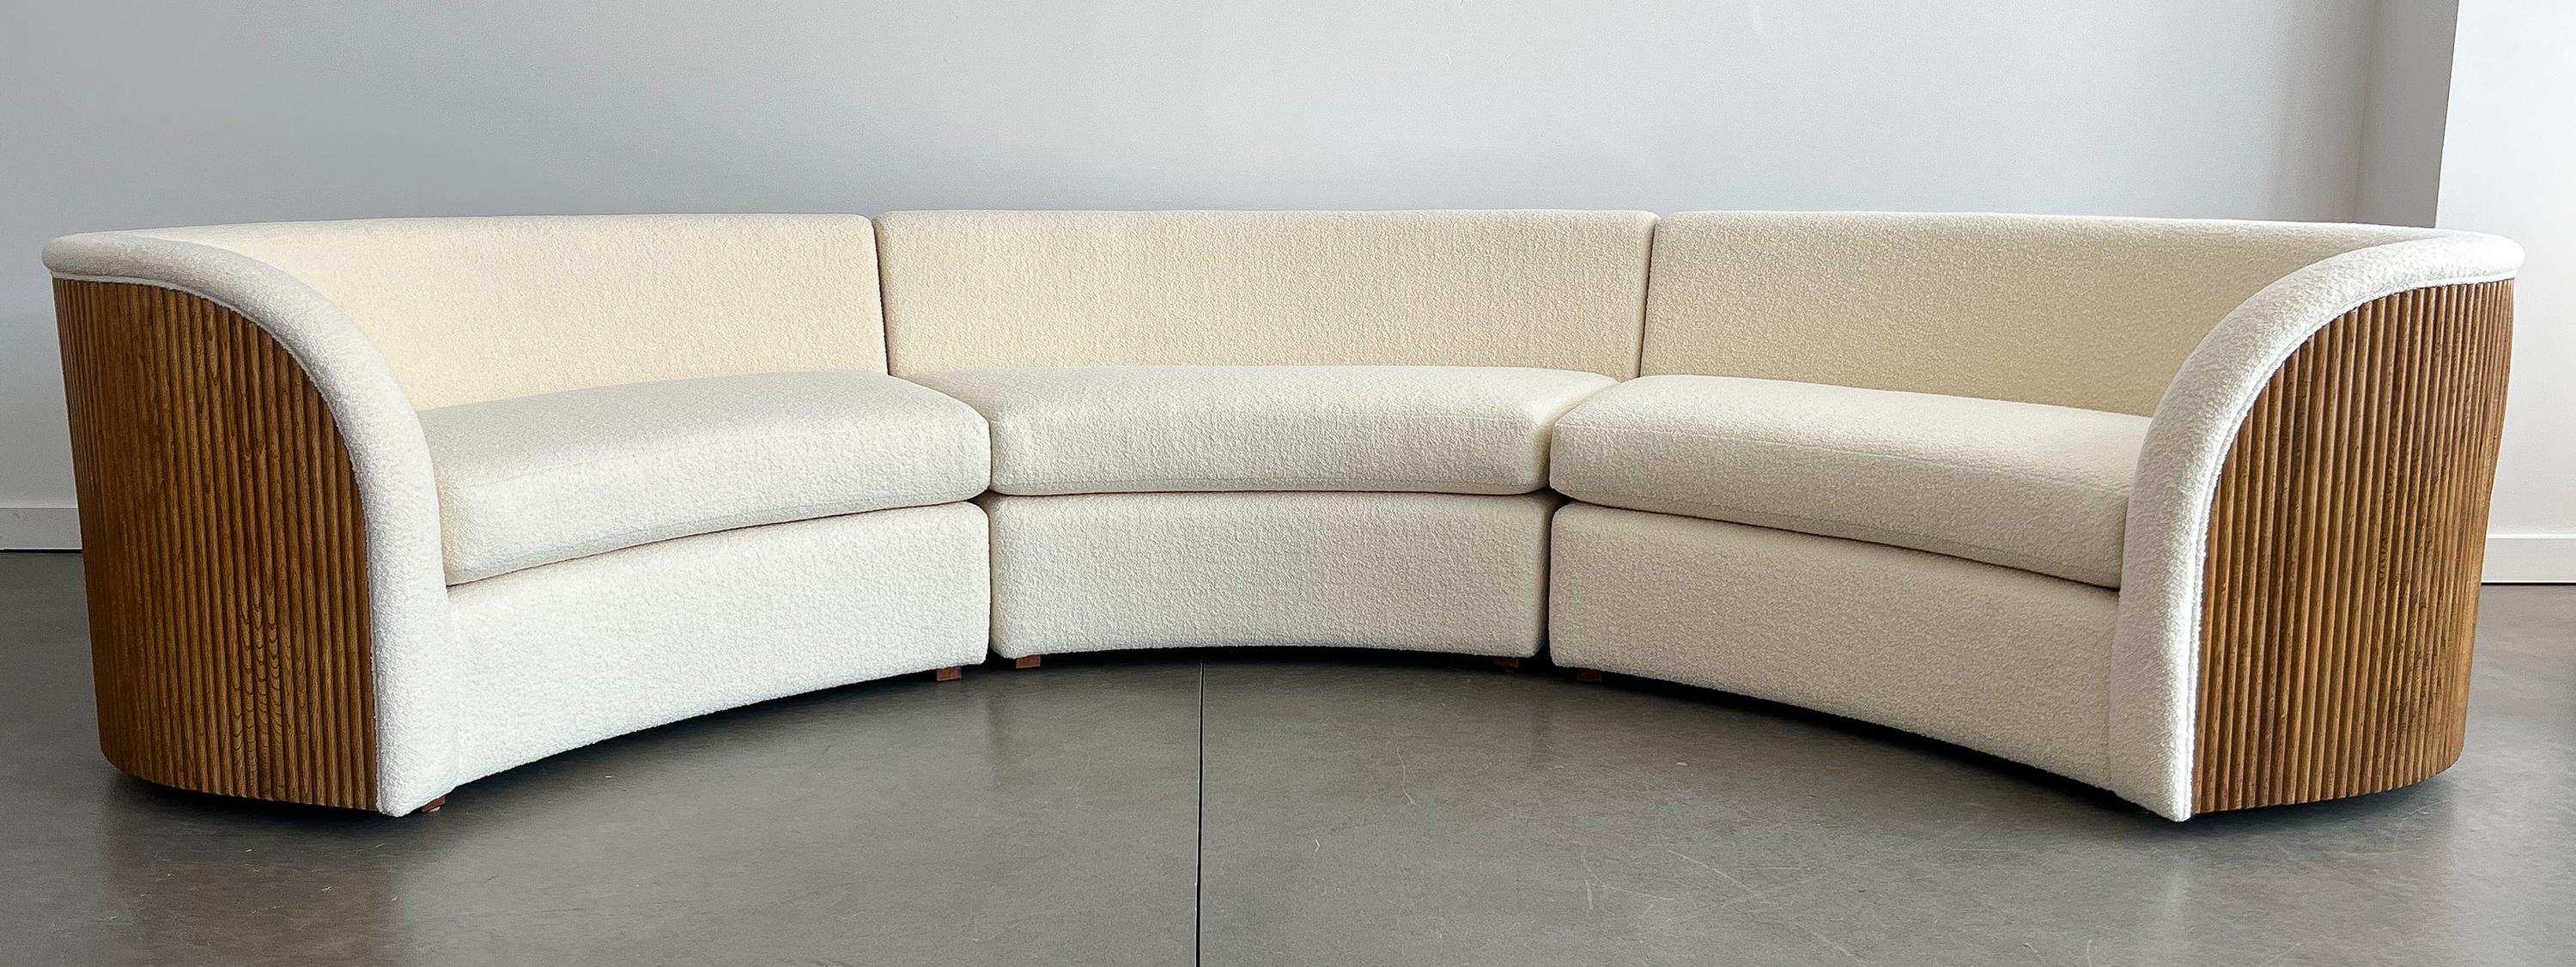 Reeded Oak Wrapped Three Piece Sectional Sofa in Cream Bouclé 7